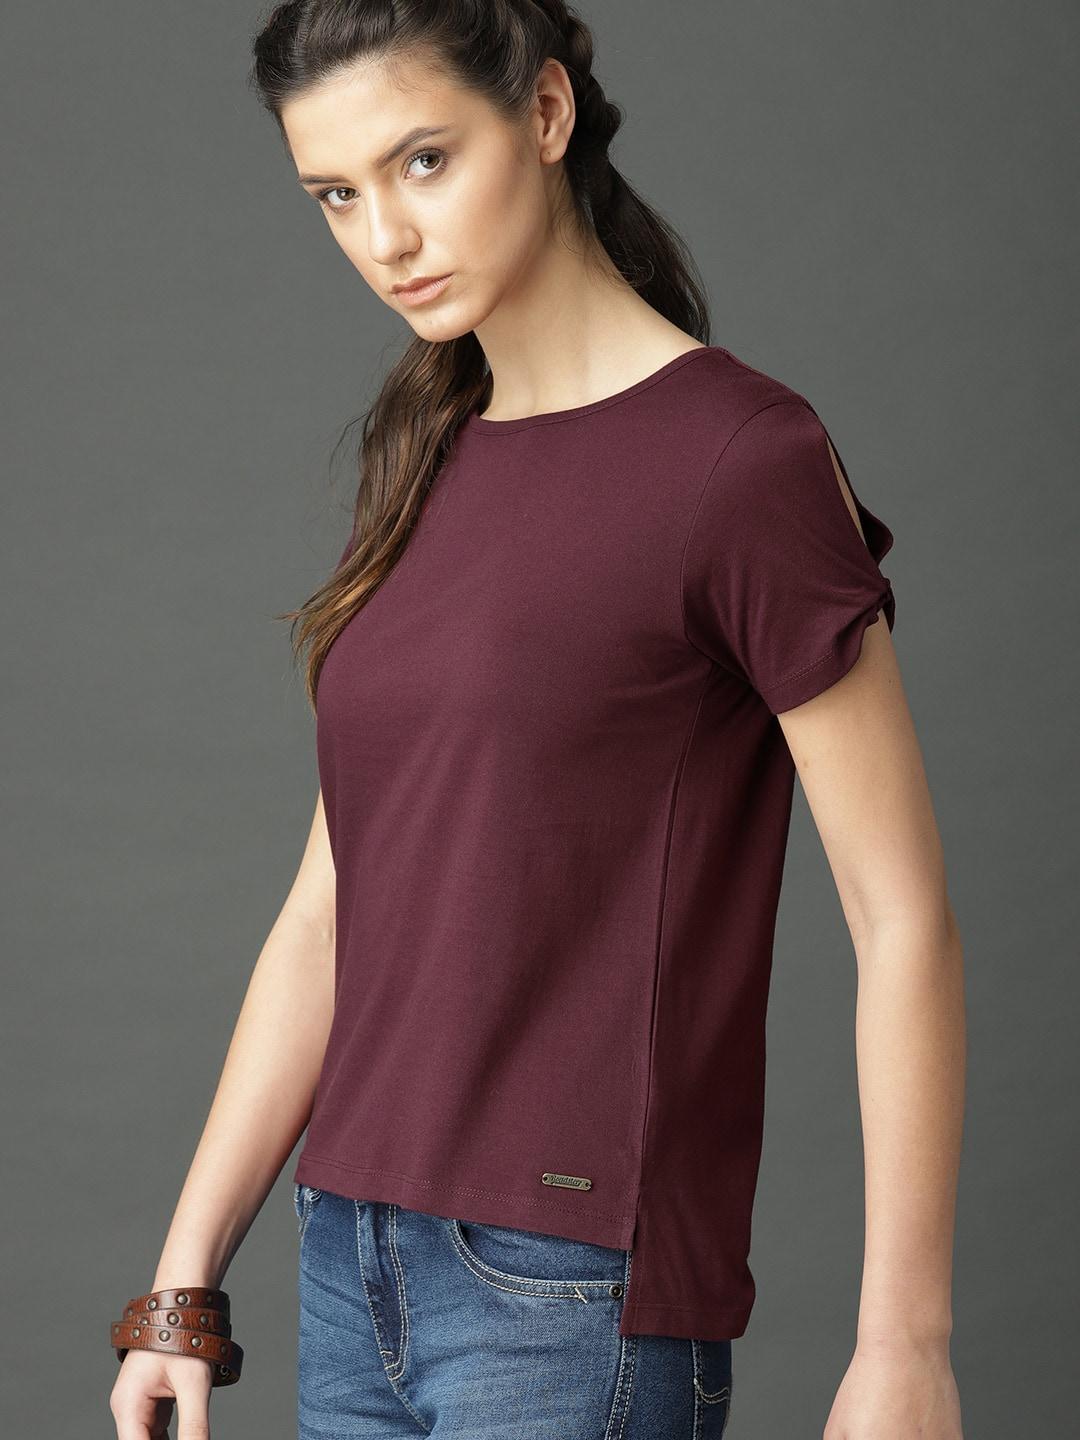 roadster-women-burgundy-solid-high-low-pure-cotton-top